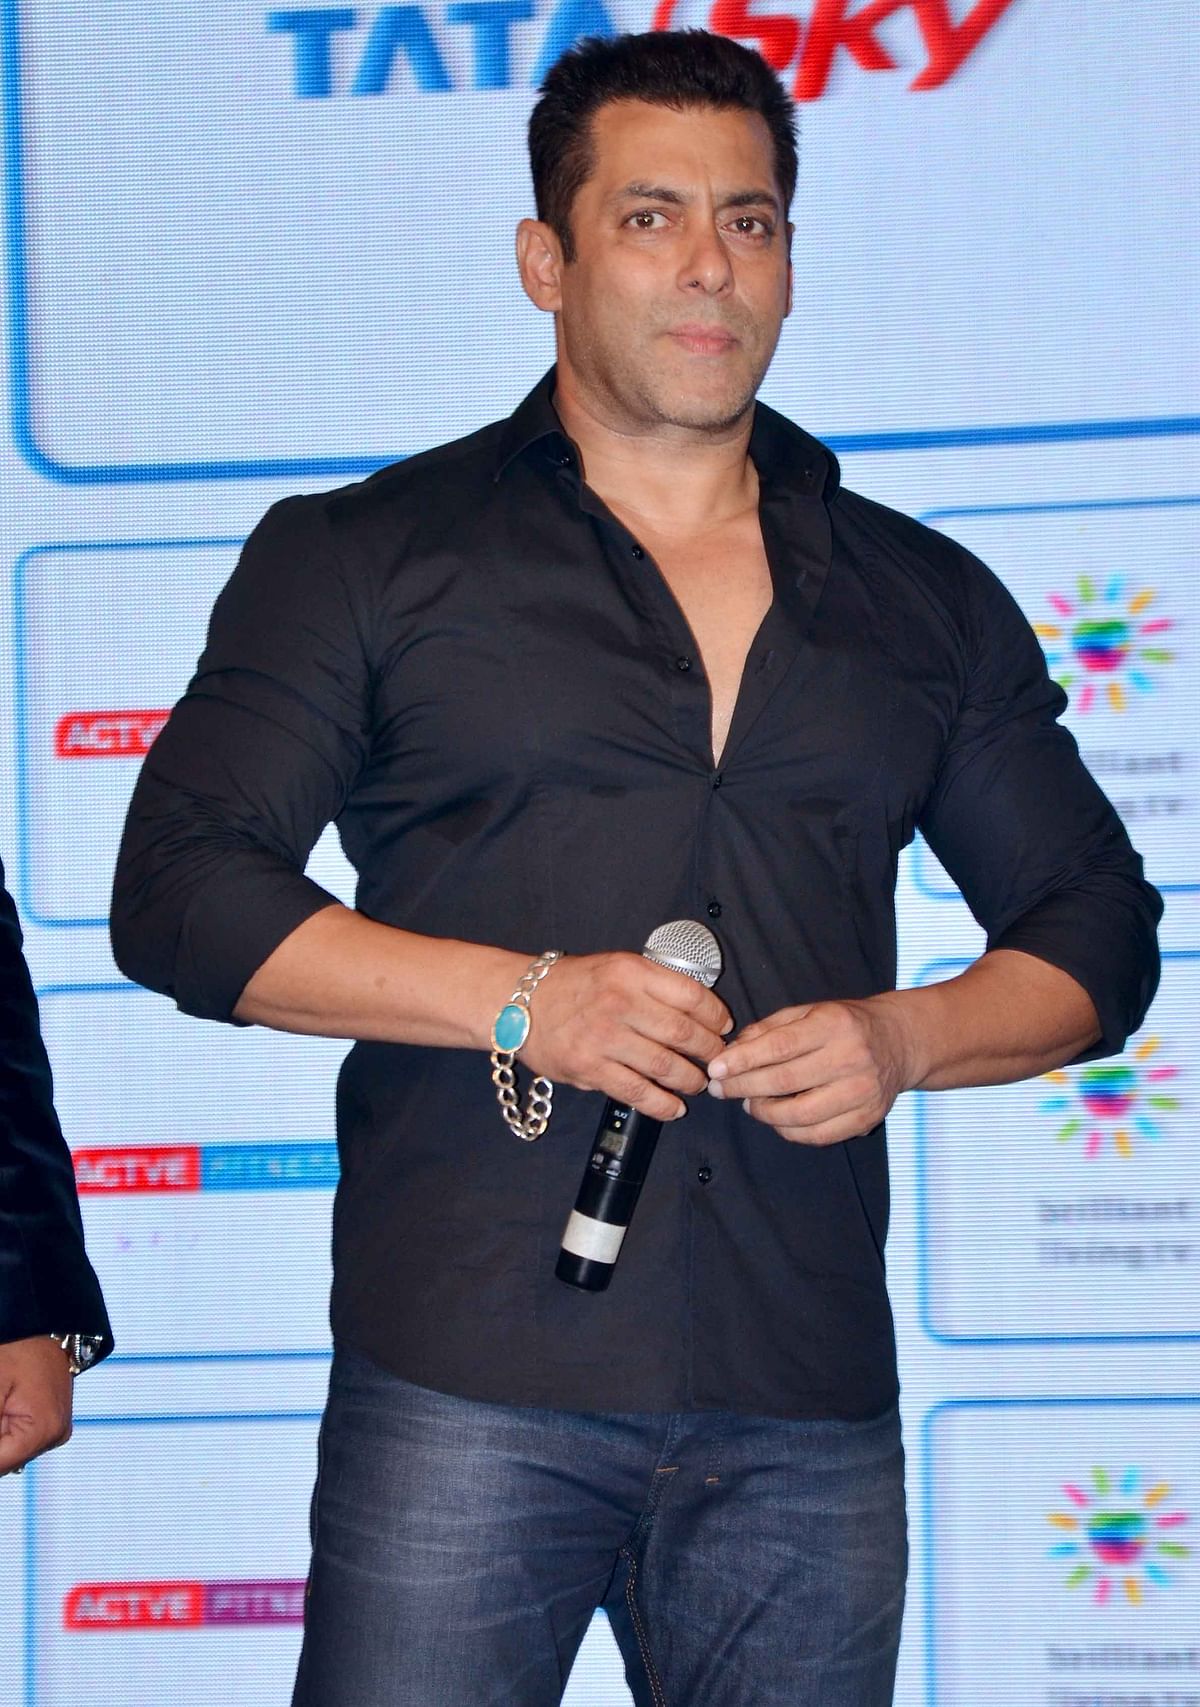 Salman Khan robbed in broad daylight by four girls who approached him pretending to be his fans.